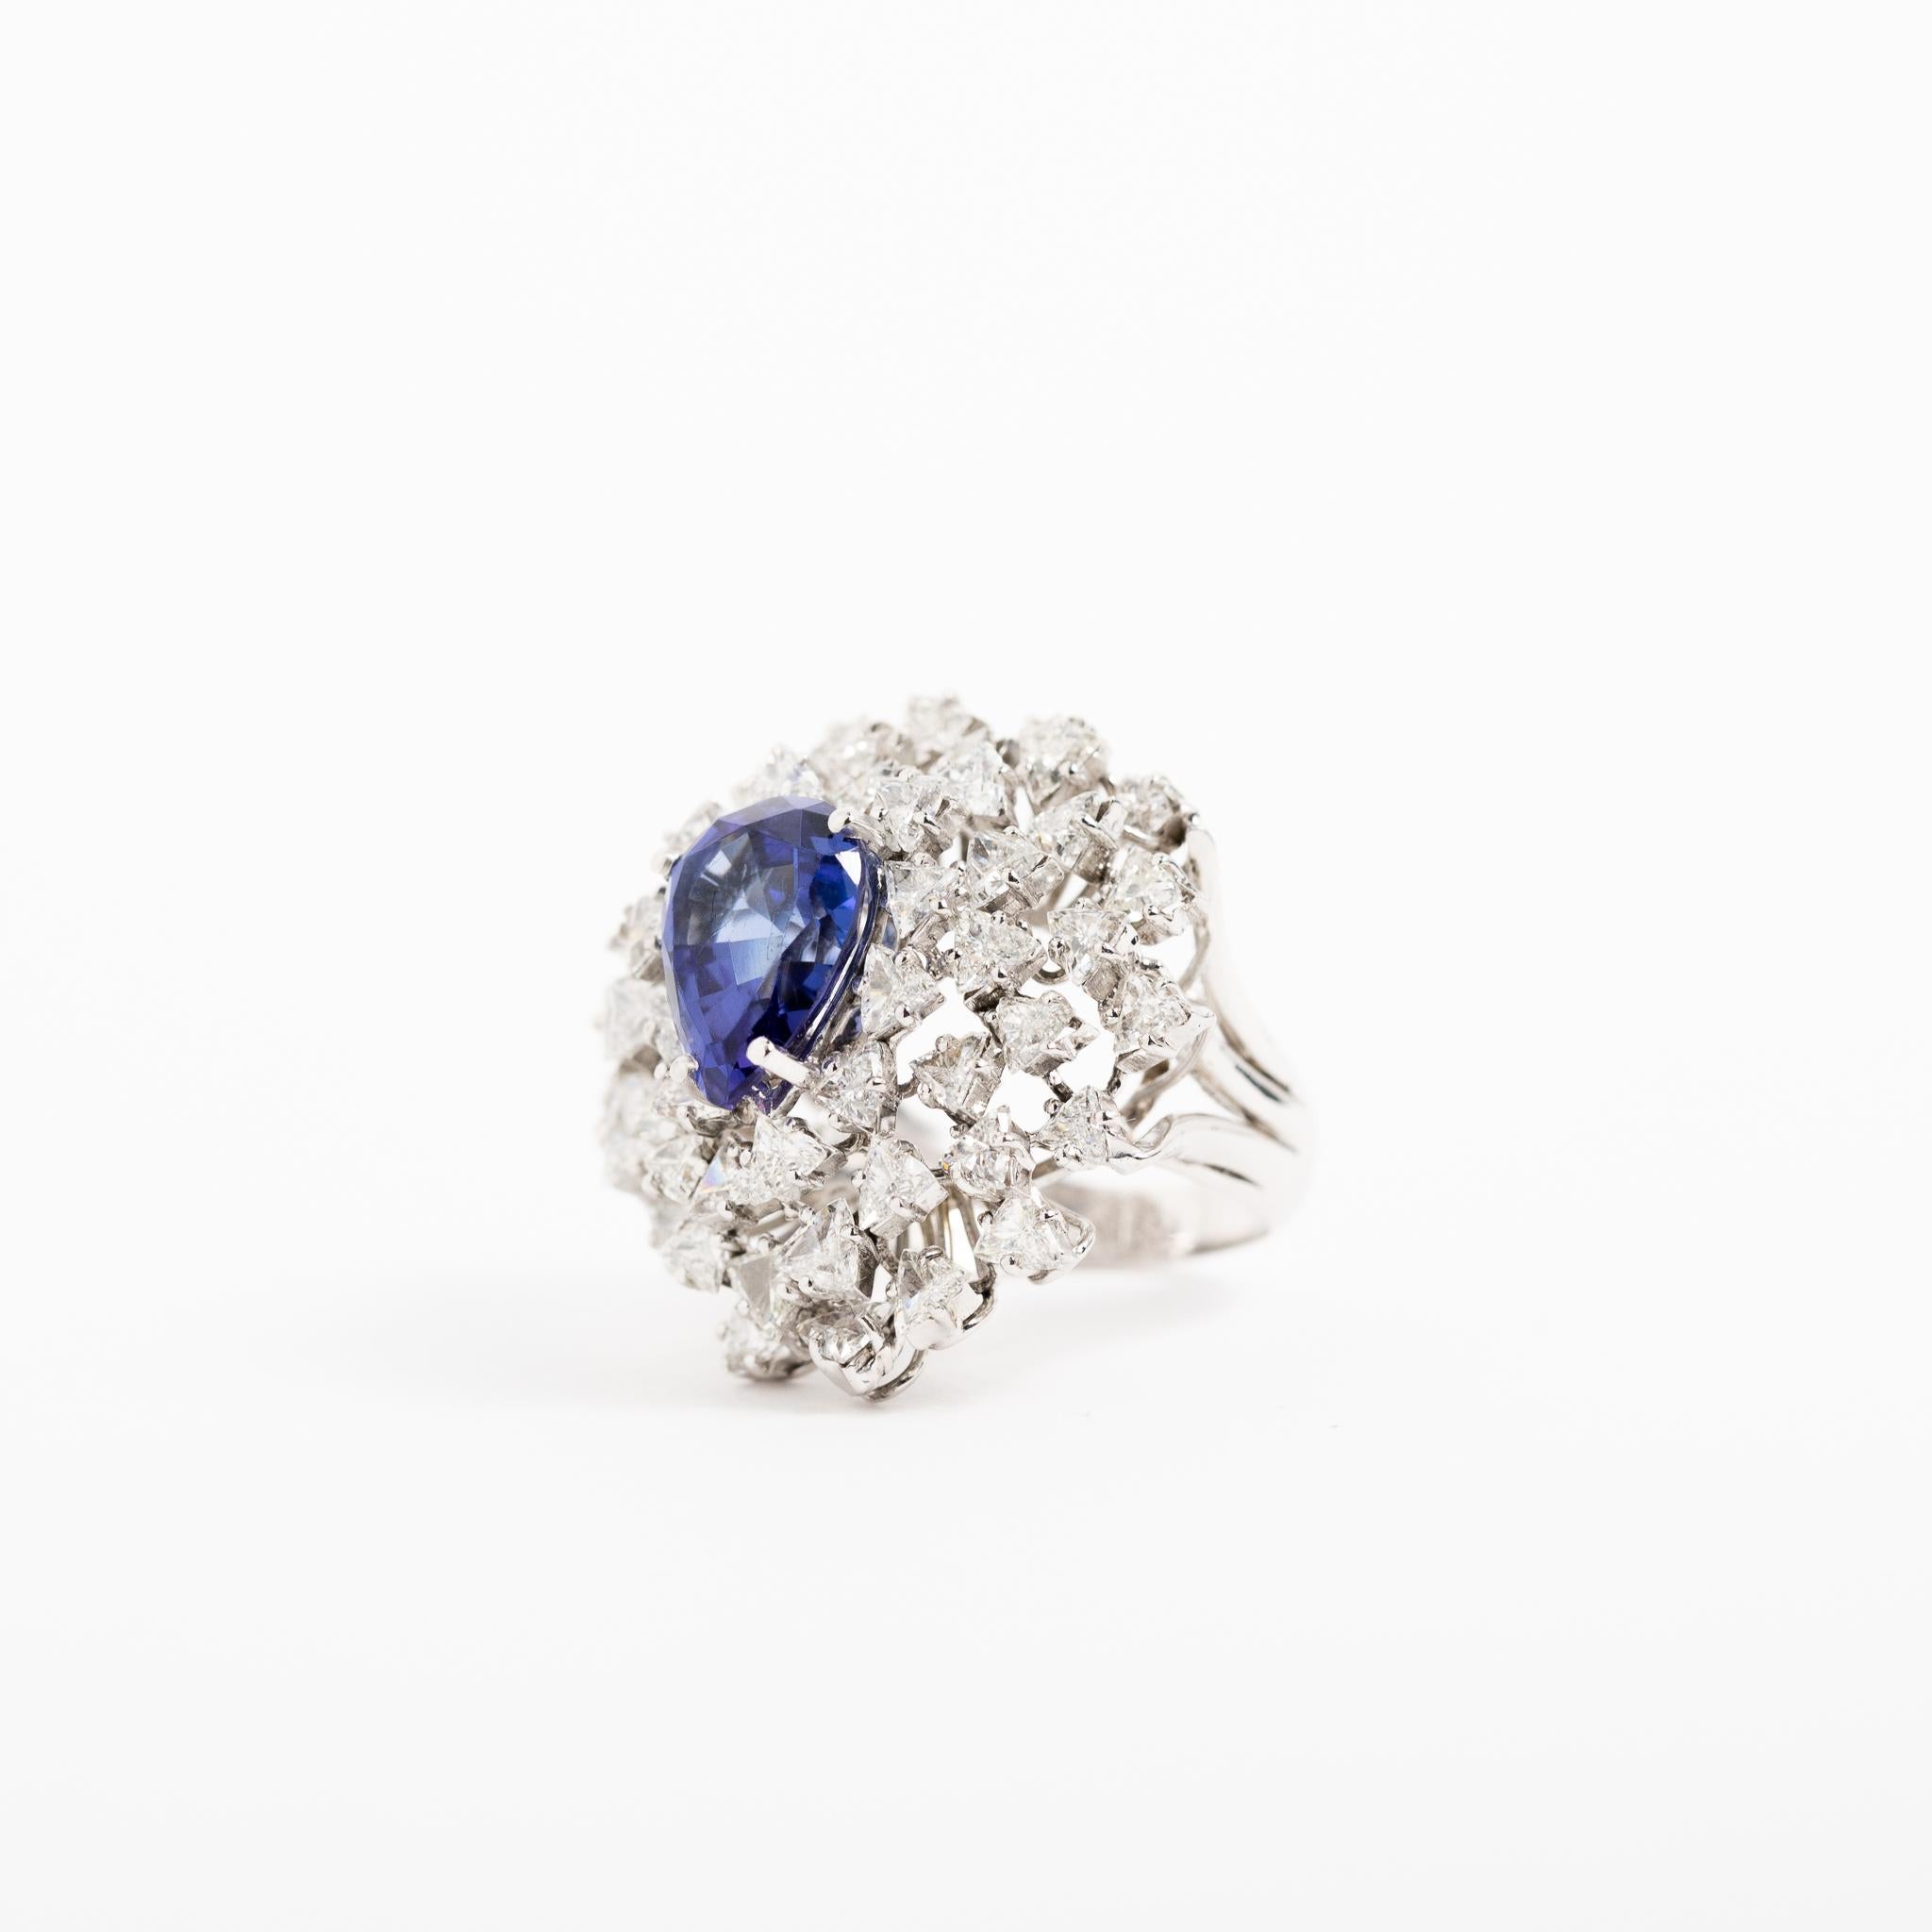 Handcrafted ring made in Italy of 18 kt. white gold with triangle-cut diamonds and teardrop-cut tanzanite.
This piece belongs to Fraleoni's Dolcevita collection.
The ring is constructed with different heights to create a three-dimensional play that